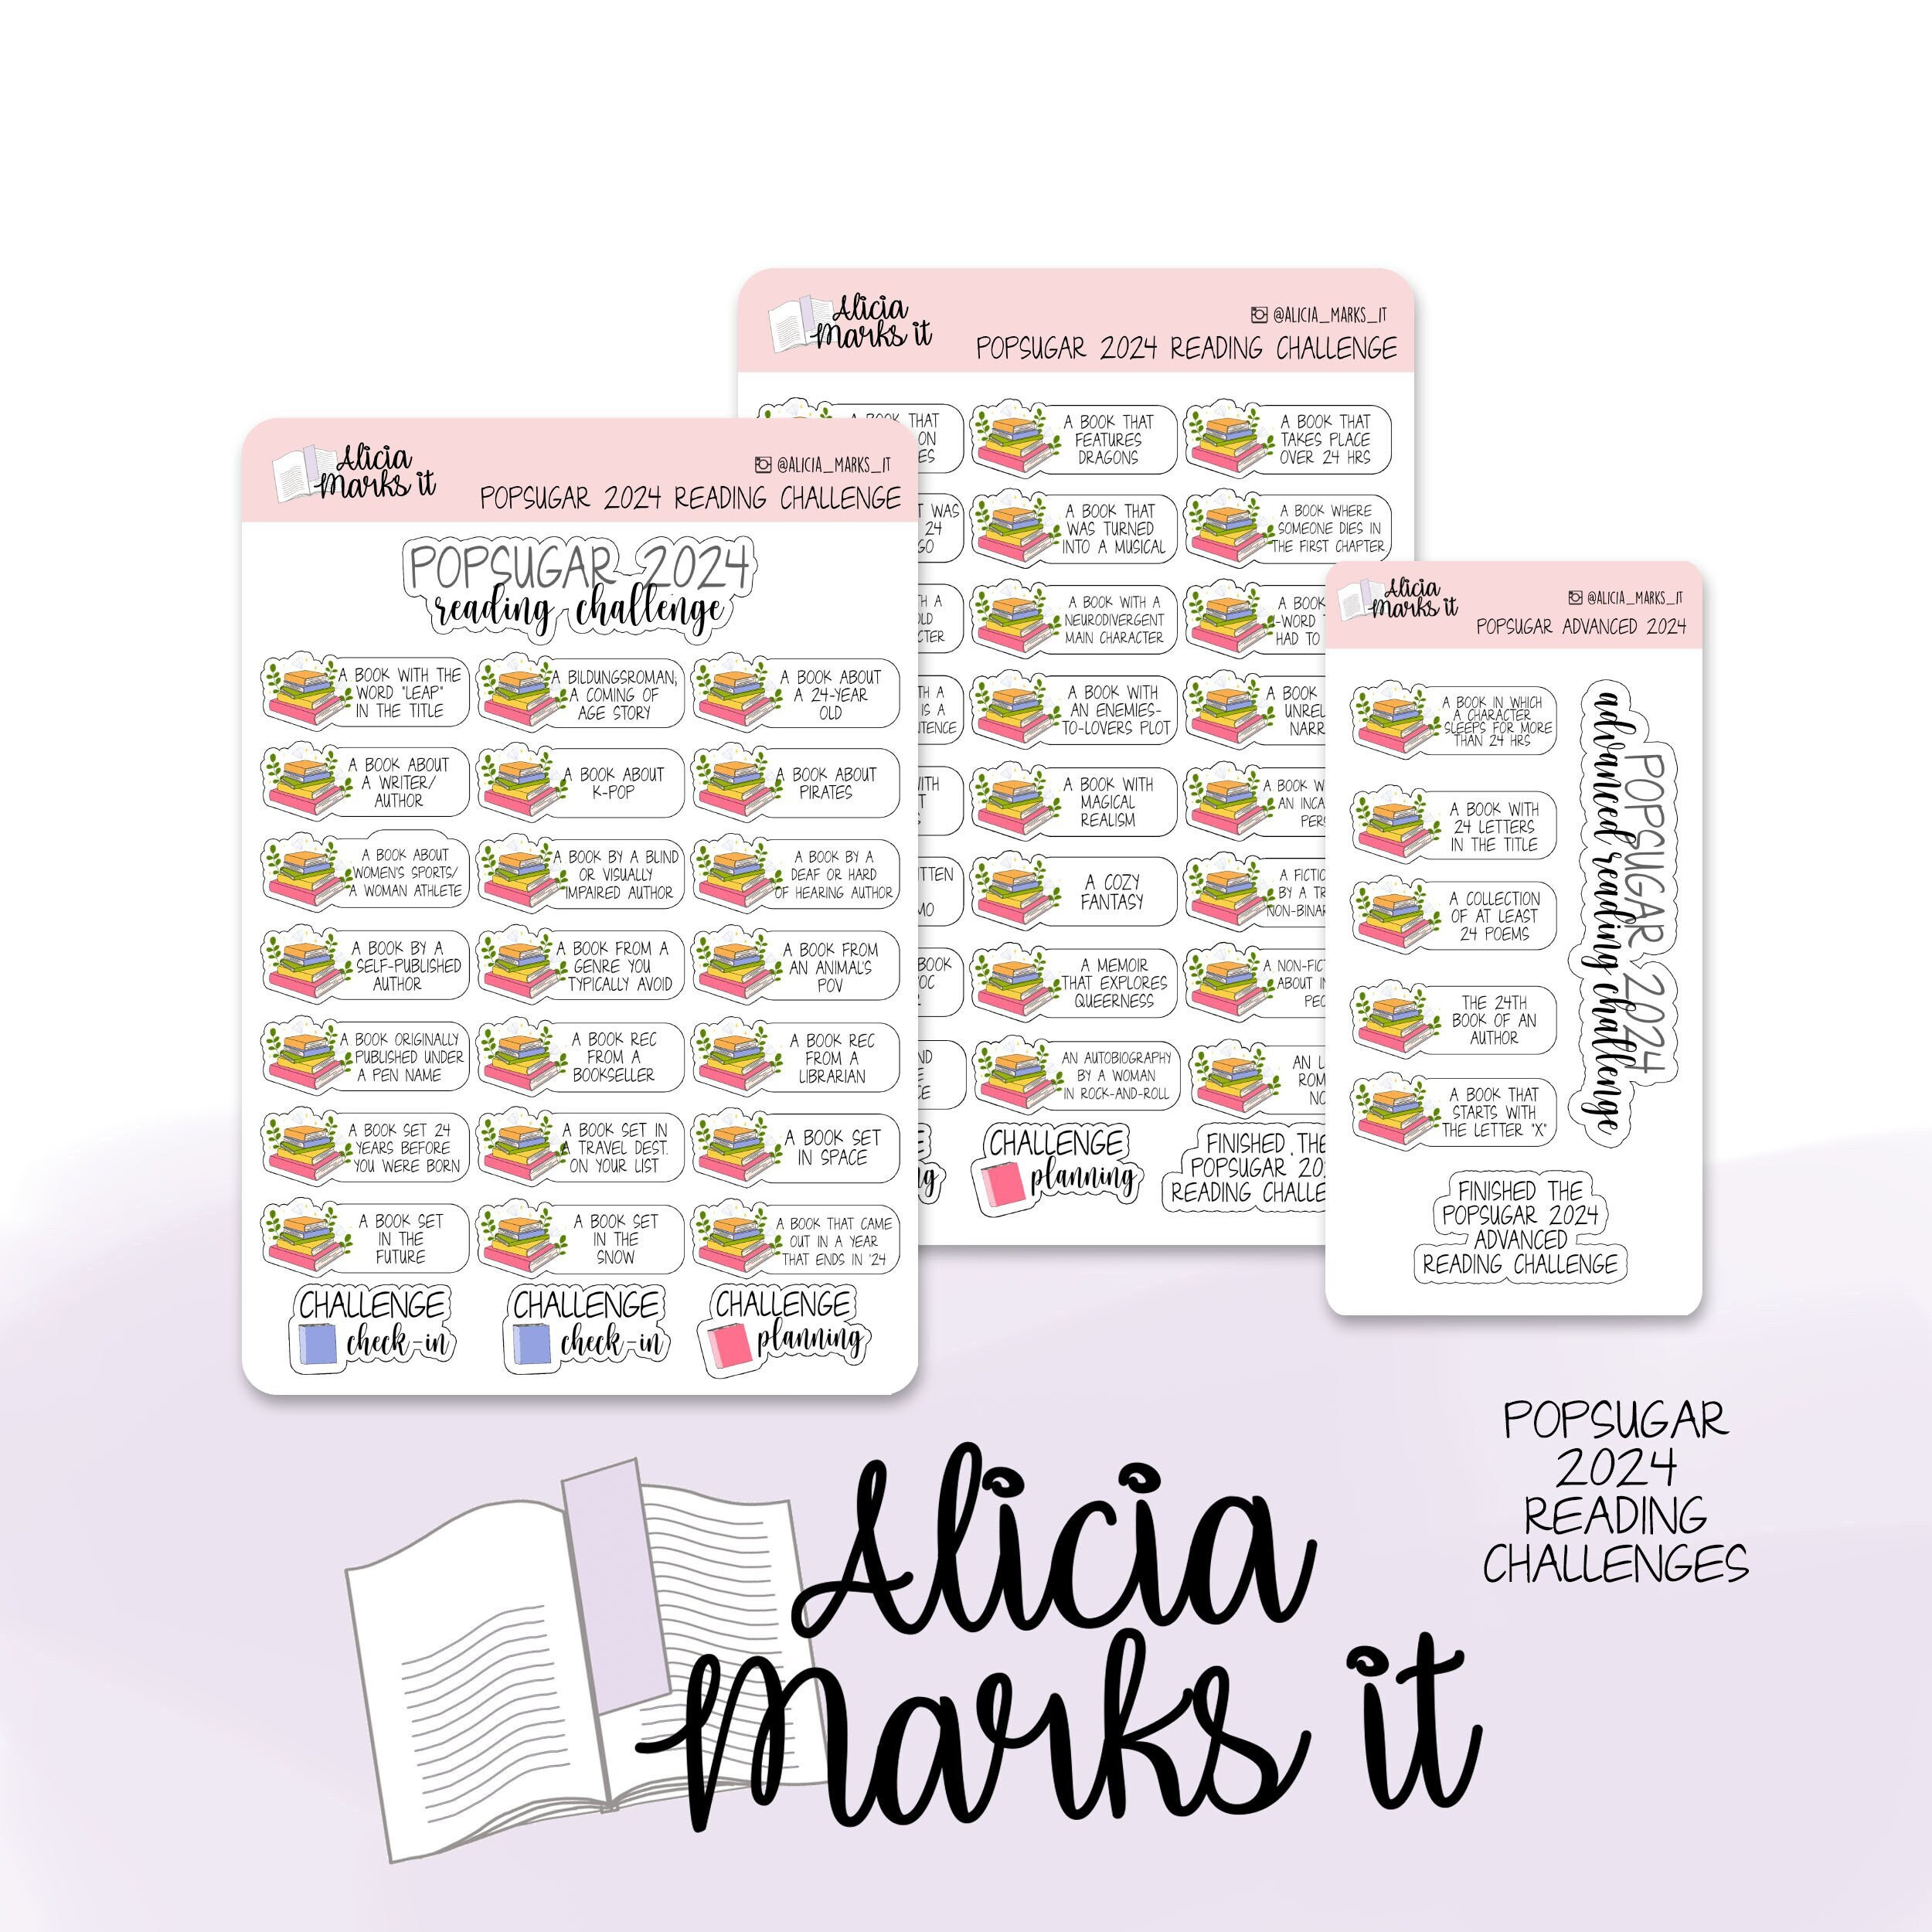 Kindle Sticker, Bookish, Book Lover Gift, Reading Journal Stickers, Cu –  Scrappy Stitcher